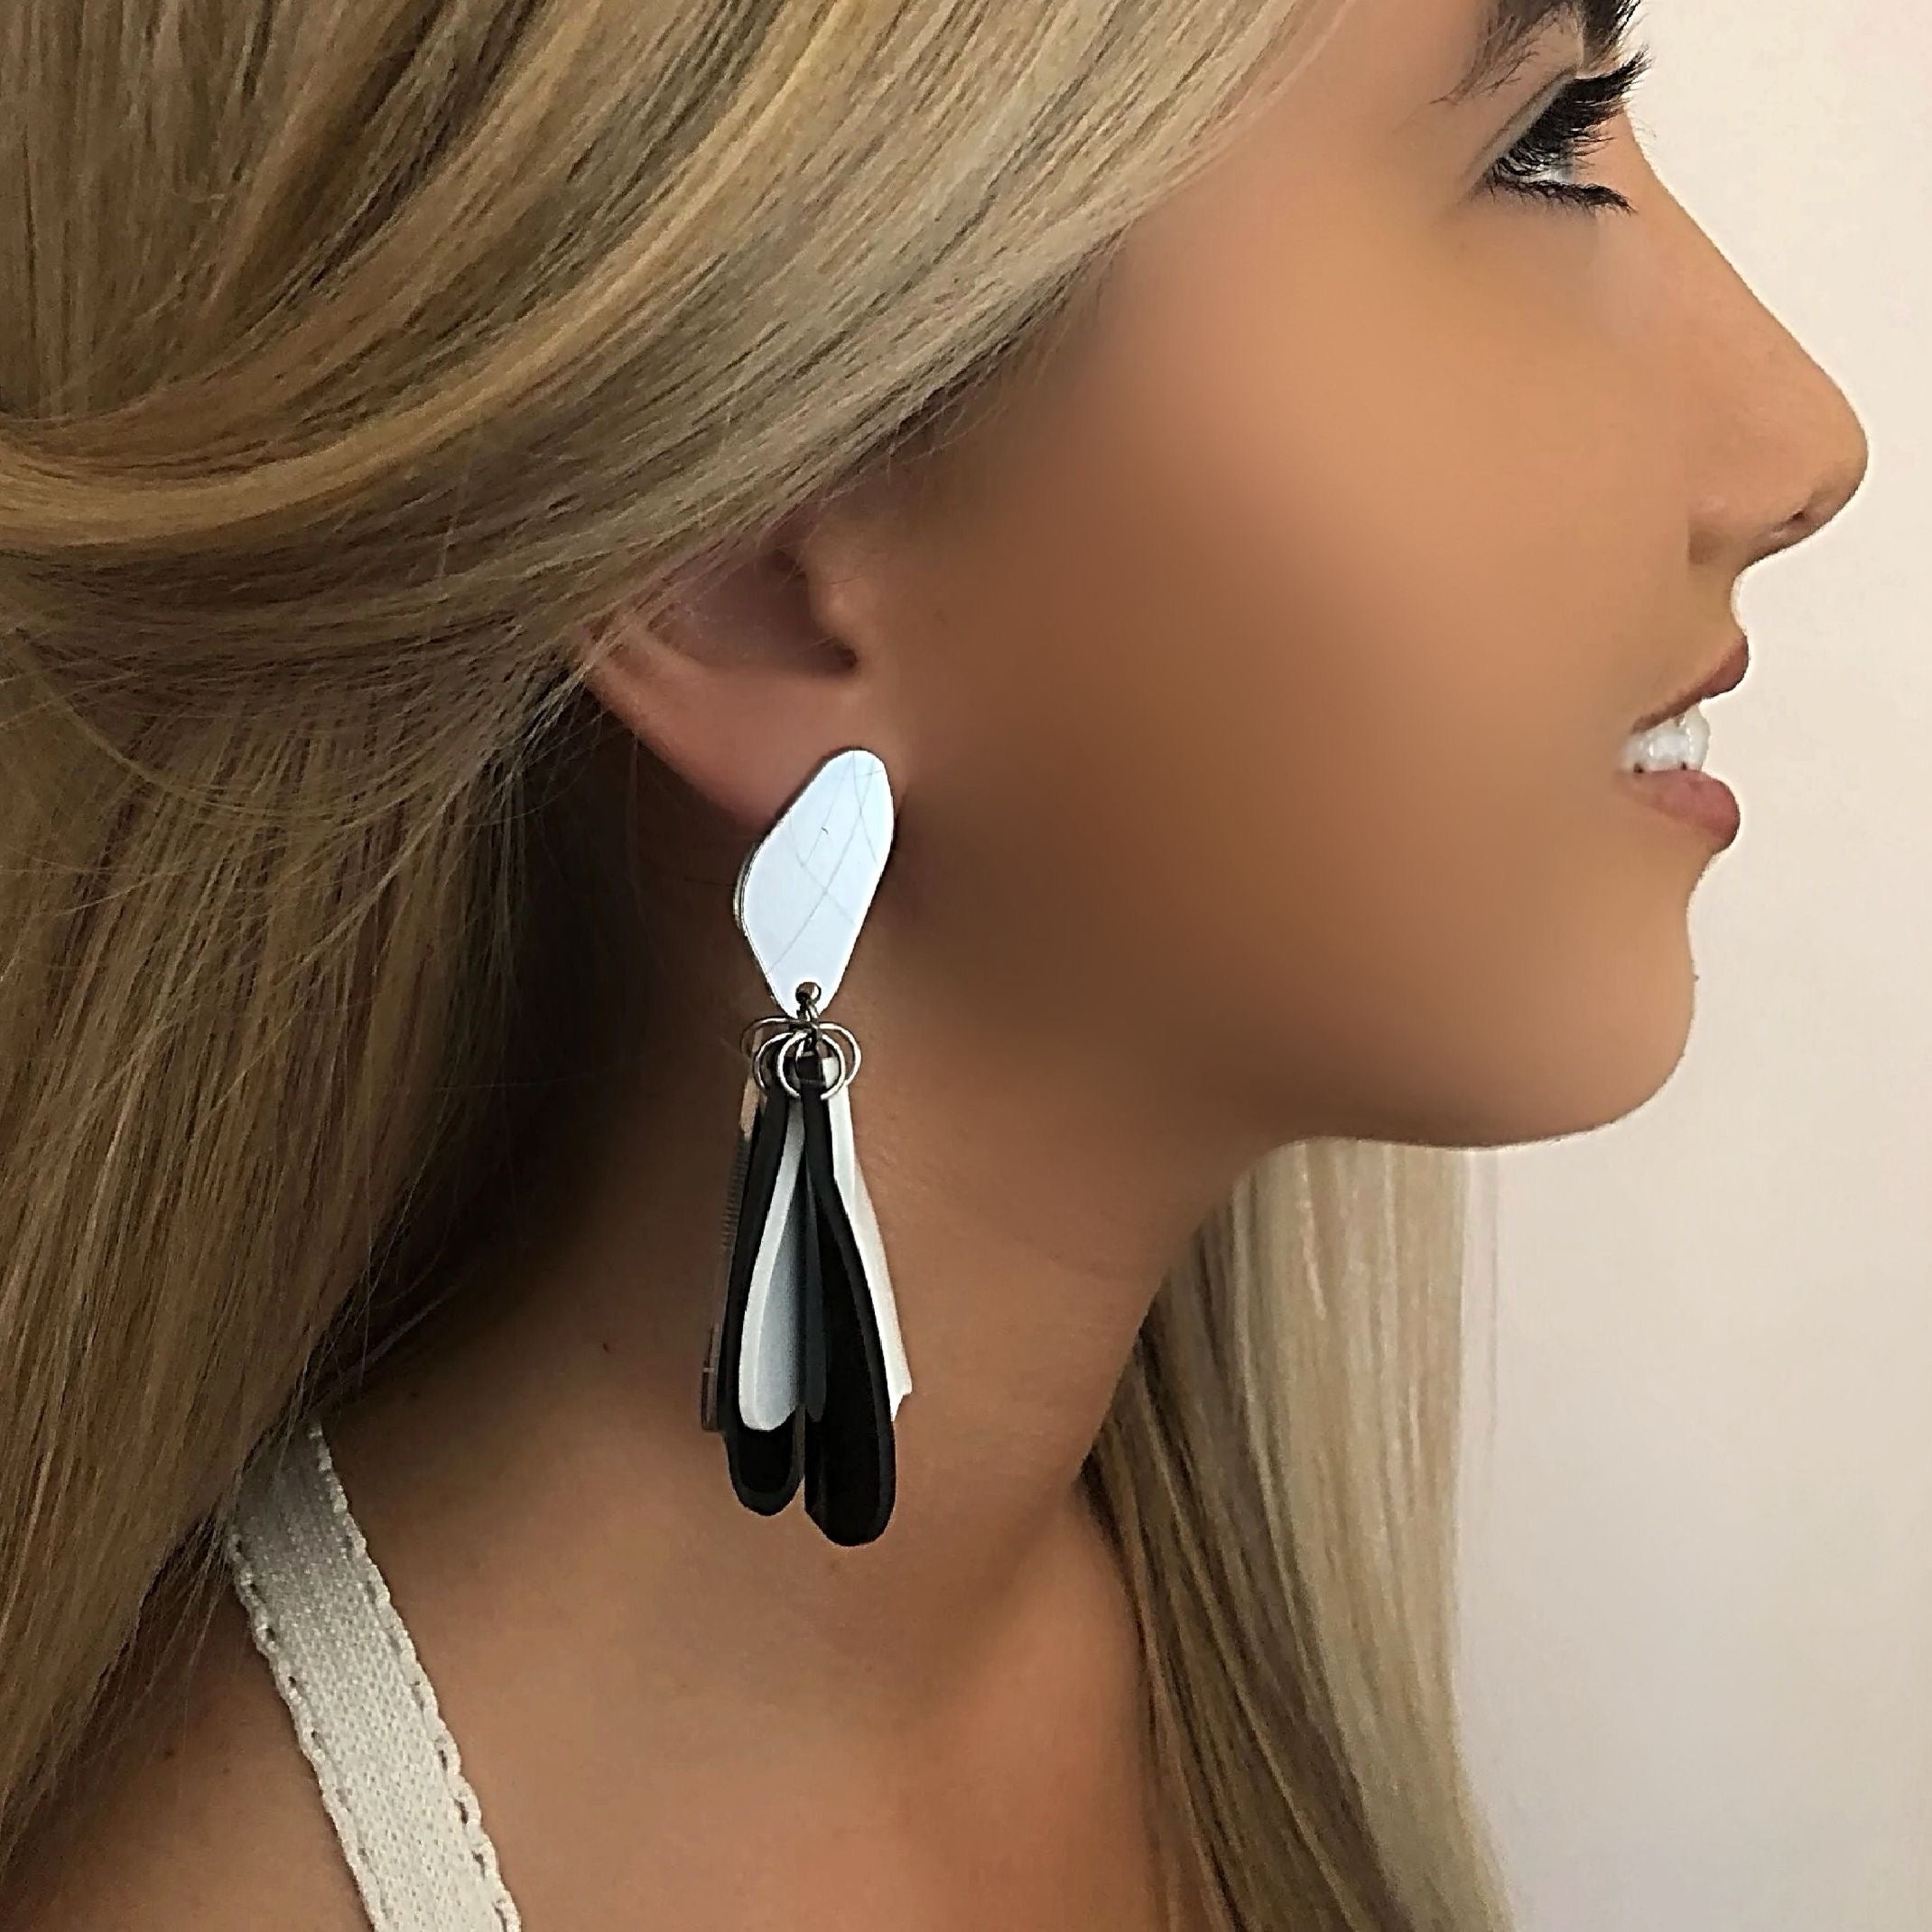 Black mismatched earrings 